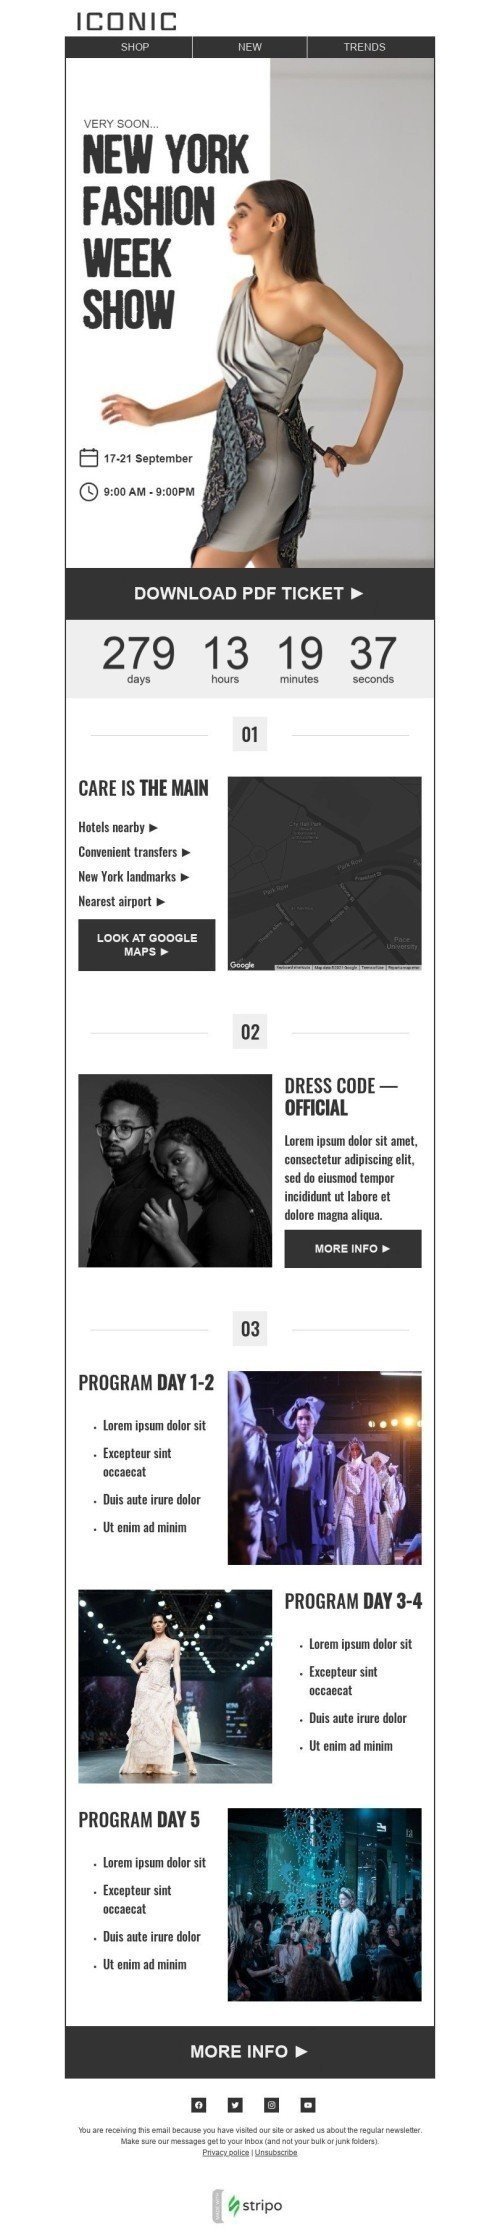 Fashion week Email Template "Reminder and program" for Fashion industry desktop view